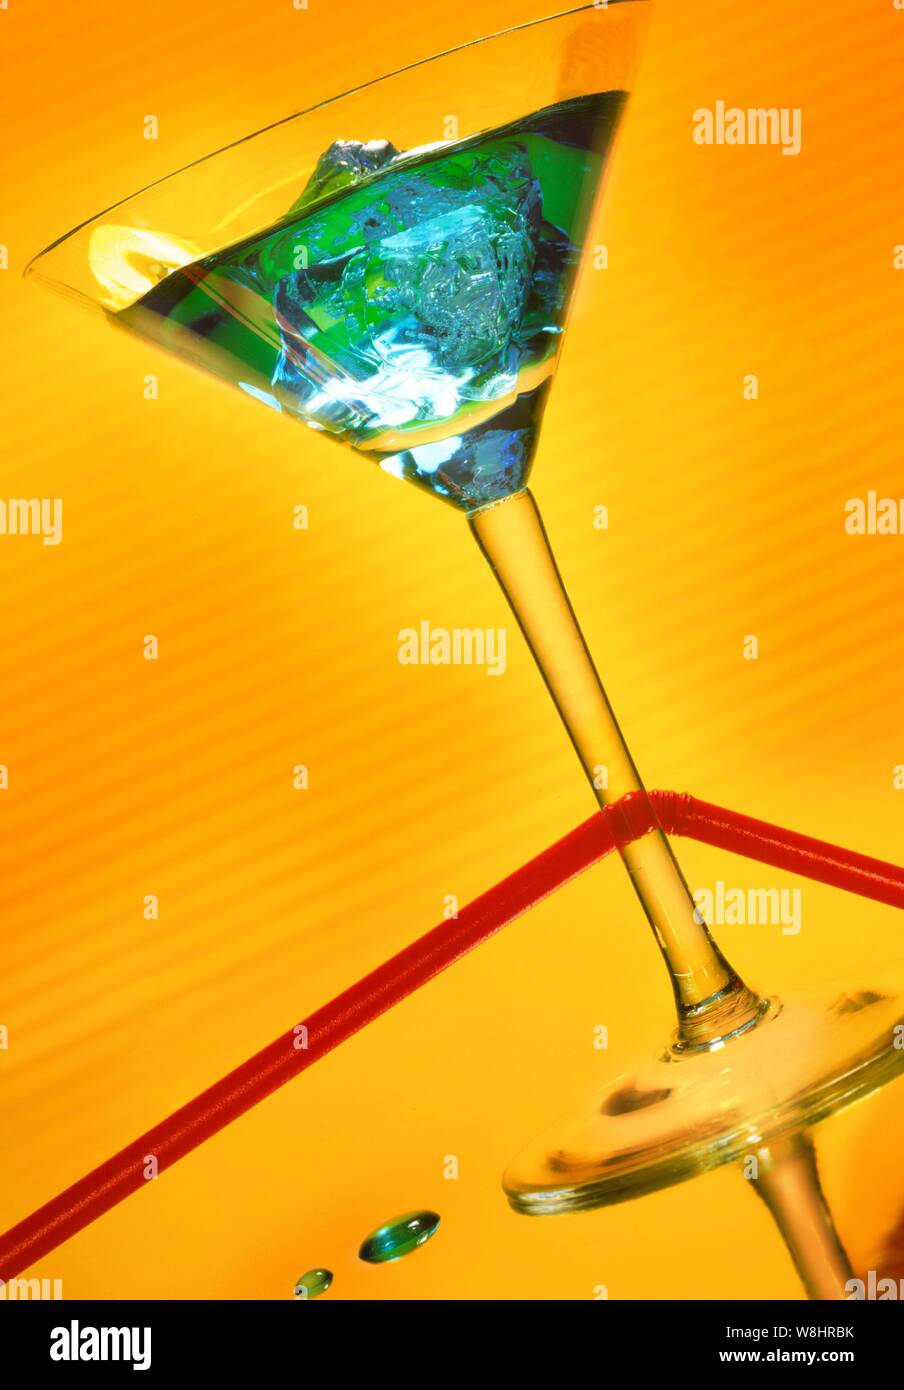 Cocktail glass against yellow background. Stock Photo